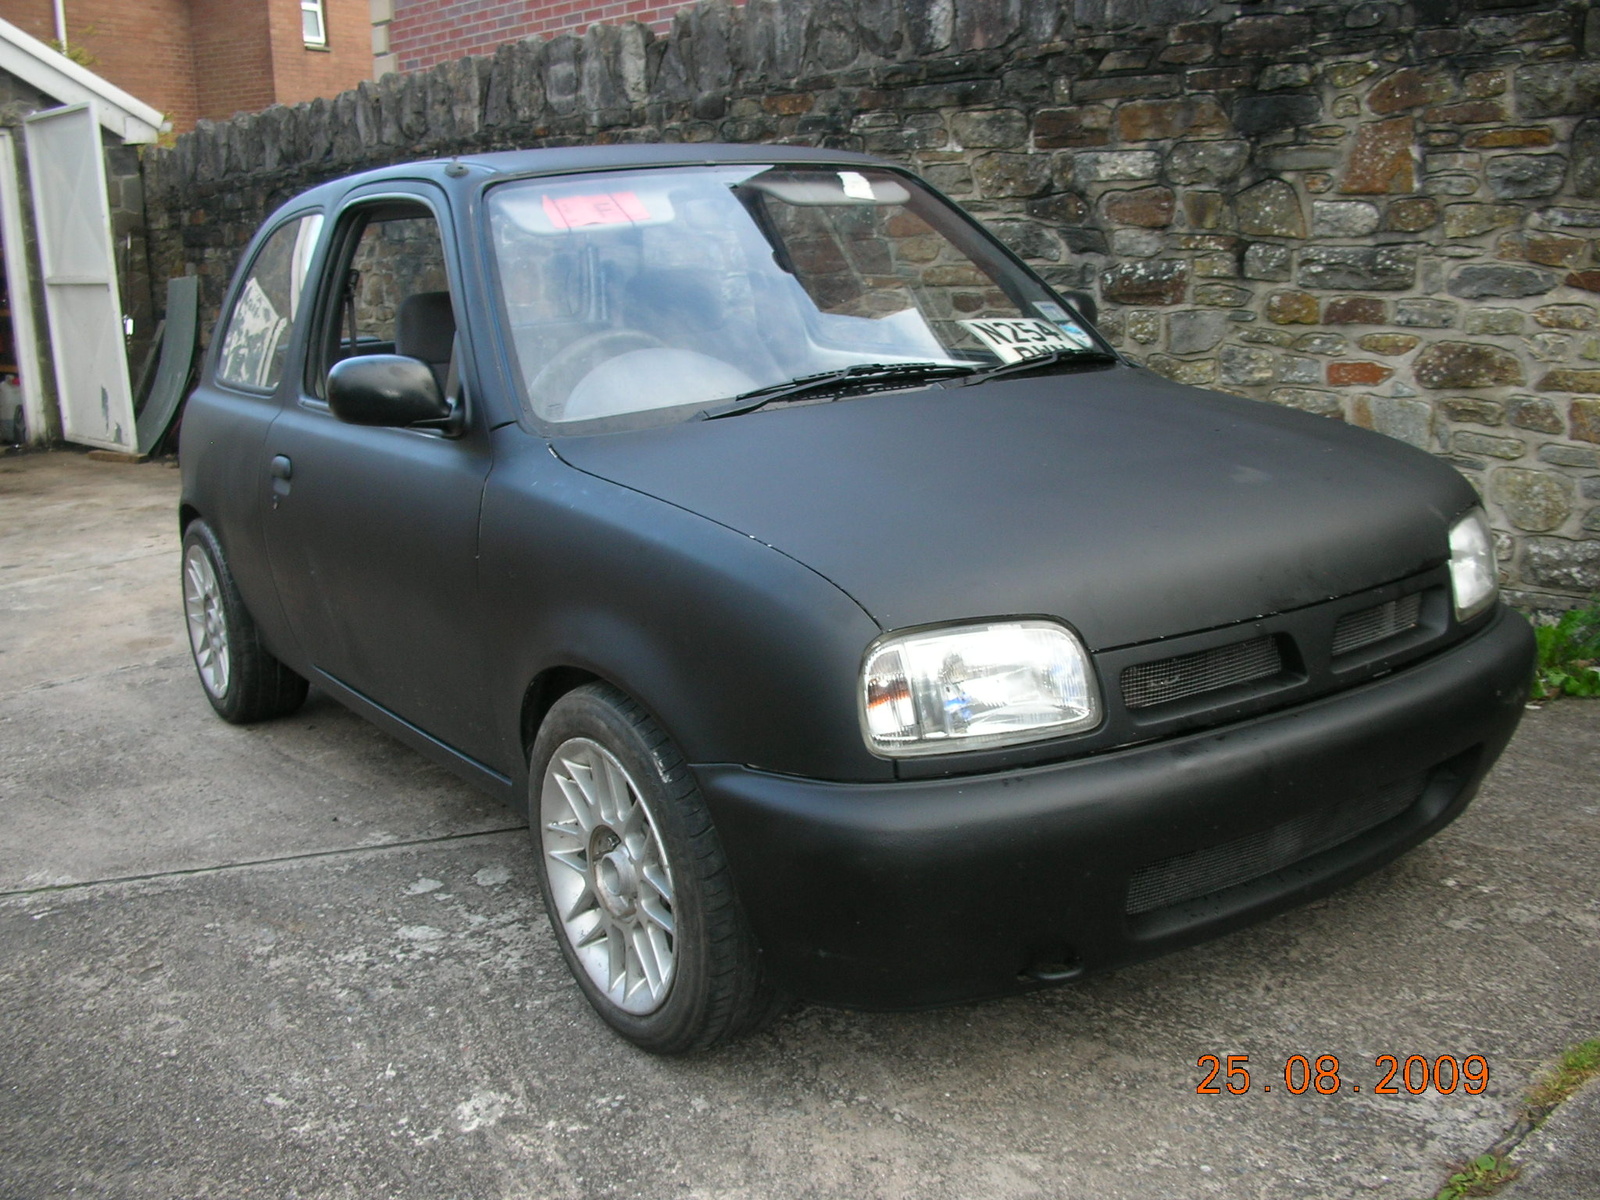 About 1995 nissan micra #5